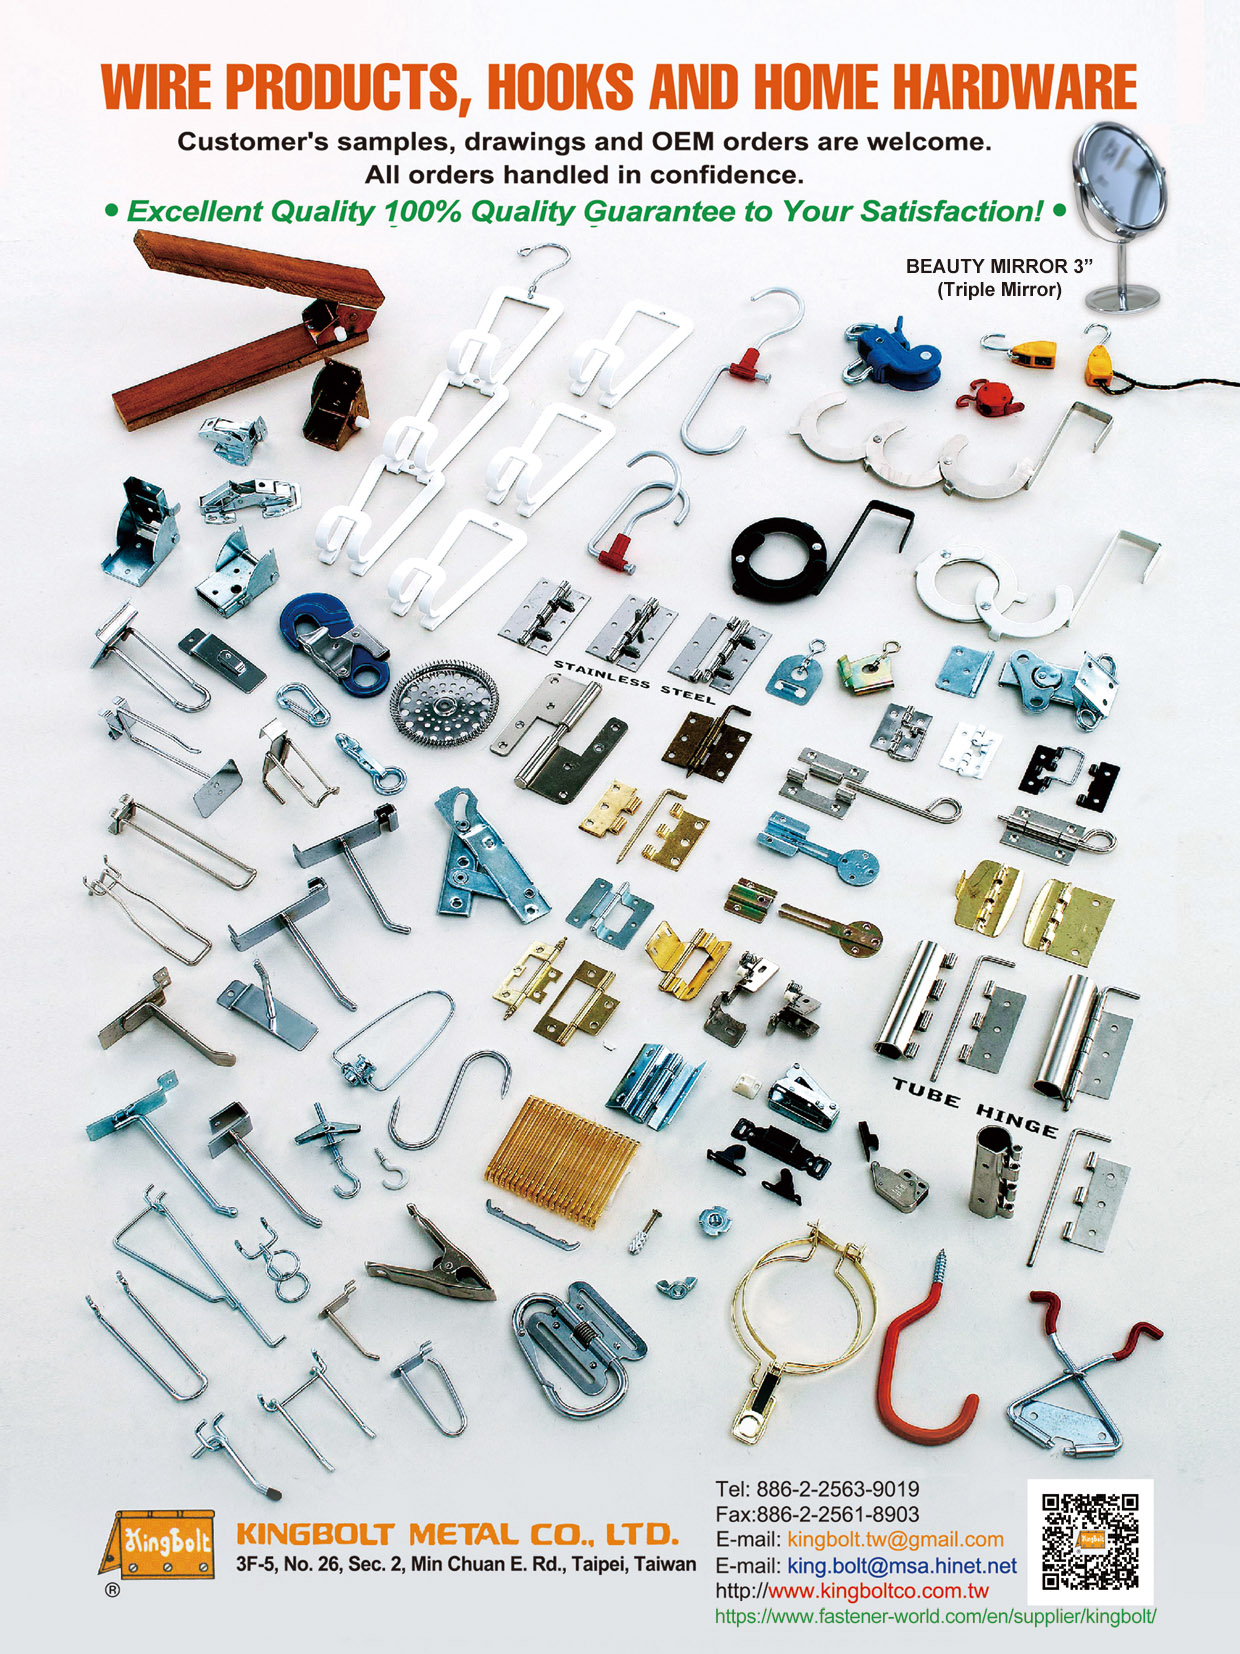 KINGBOLT METAL CO., LTD. , WIRE PRODUCTS, HOOKS AND HOME HARDWARE